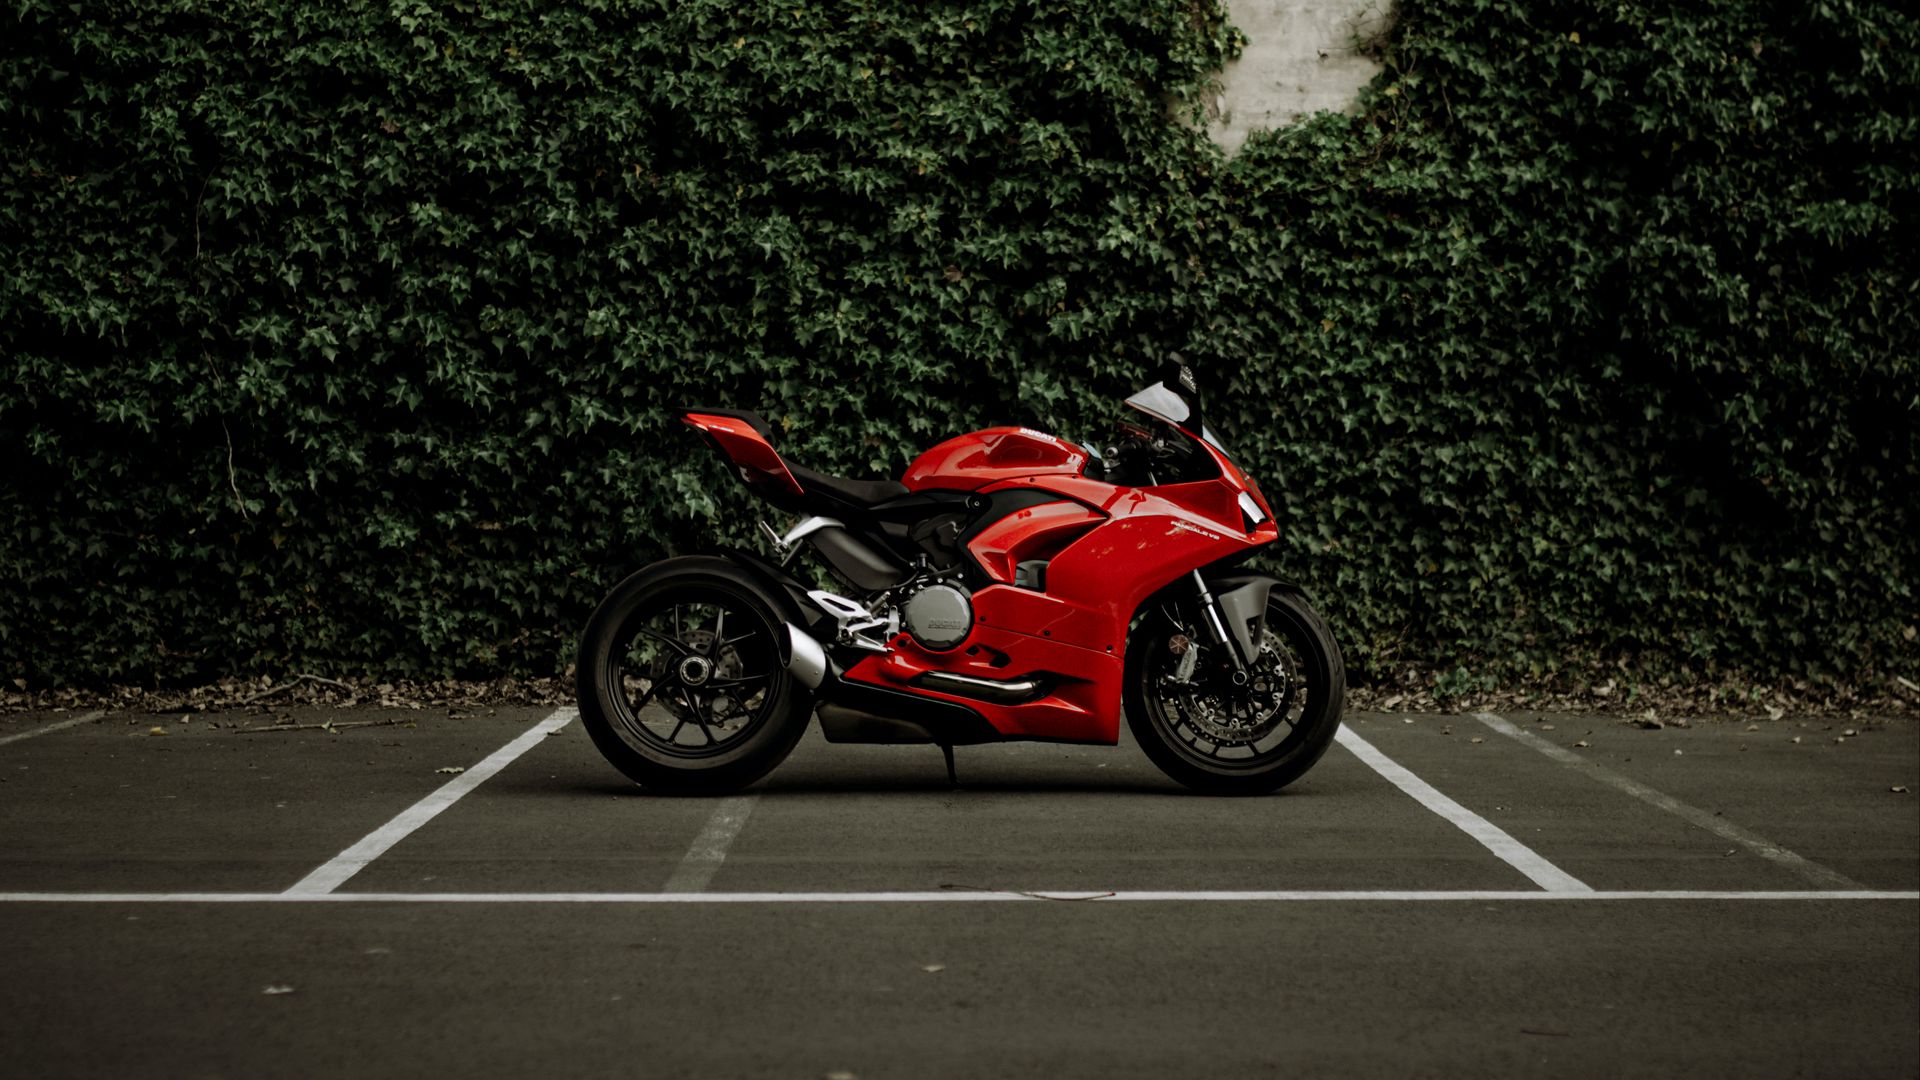 Download wallpaper 1920x1080 ducati panigale v2, ducati, motorcycle, bike,  red full hd, hdtv, fhd, 1080p hd background